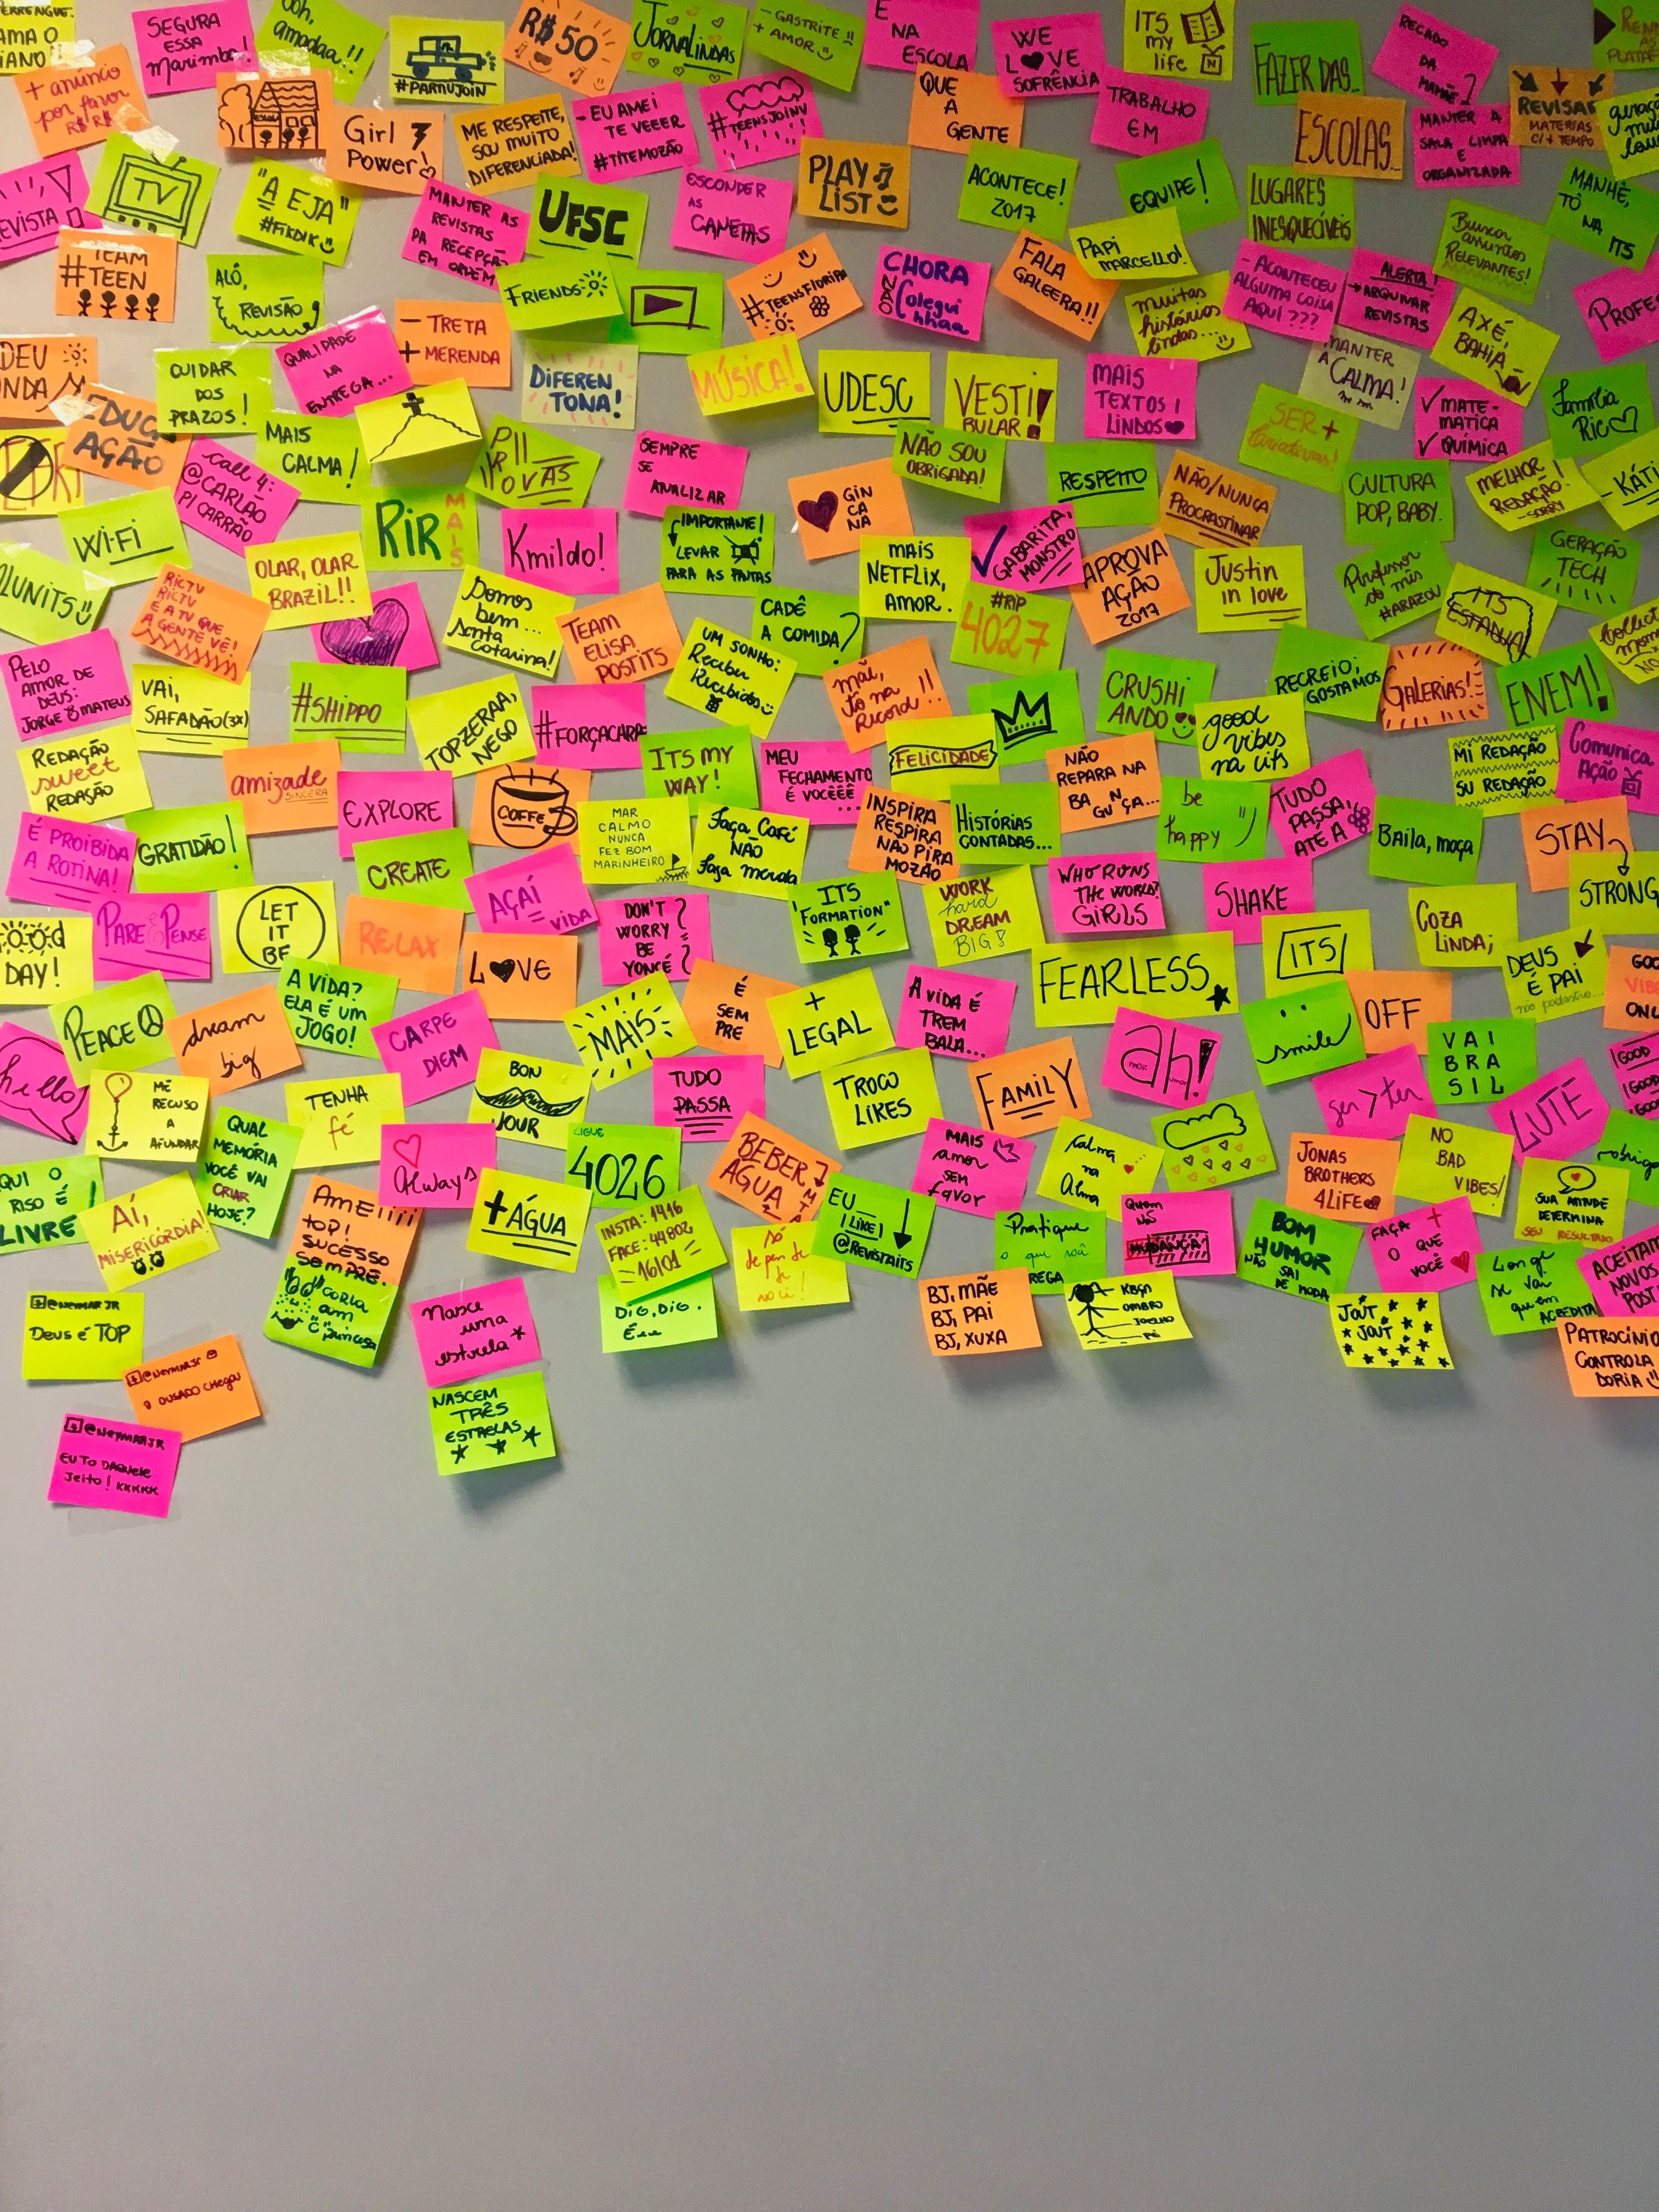 post it notes on wall ideation